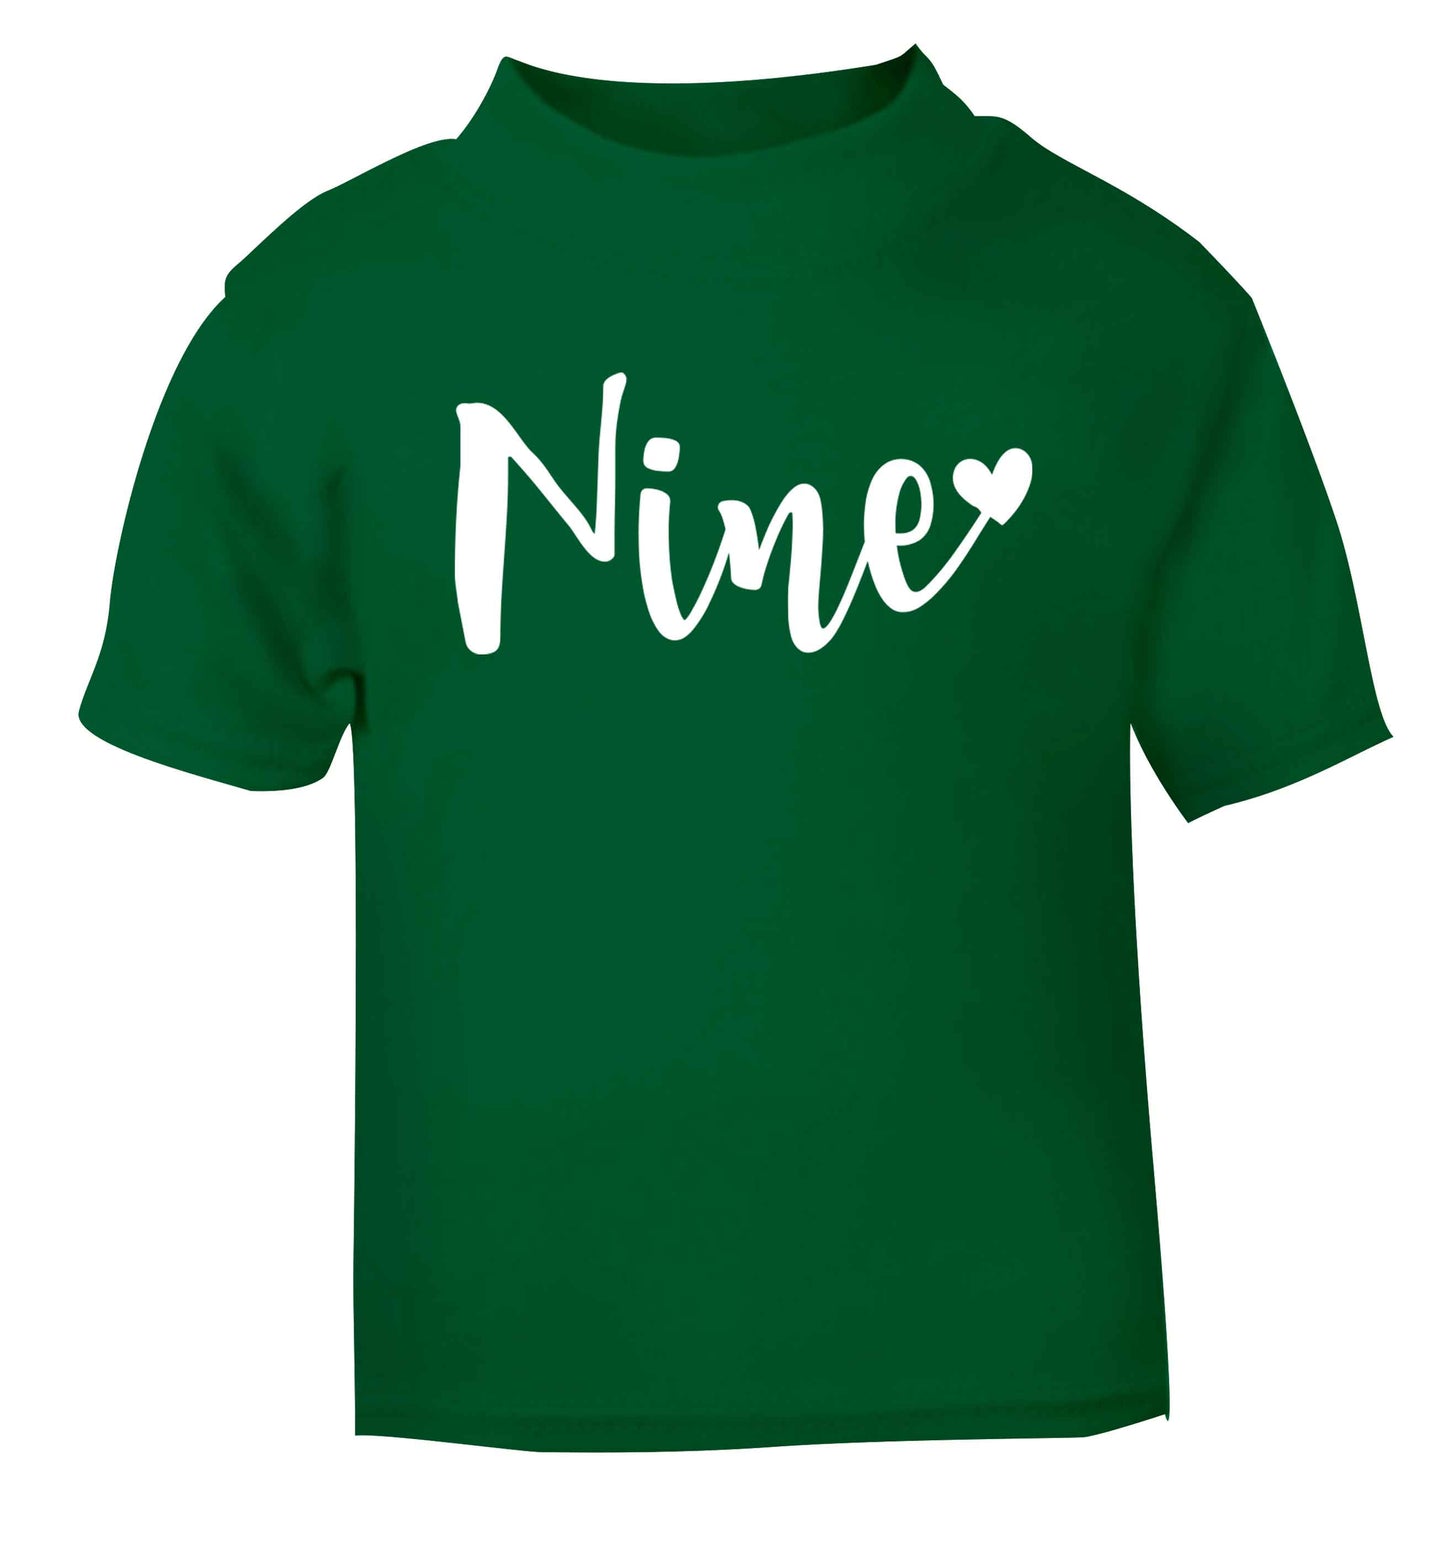 Nine and heart green baby toddler Tshirt 2 Years